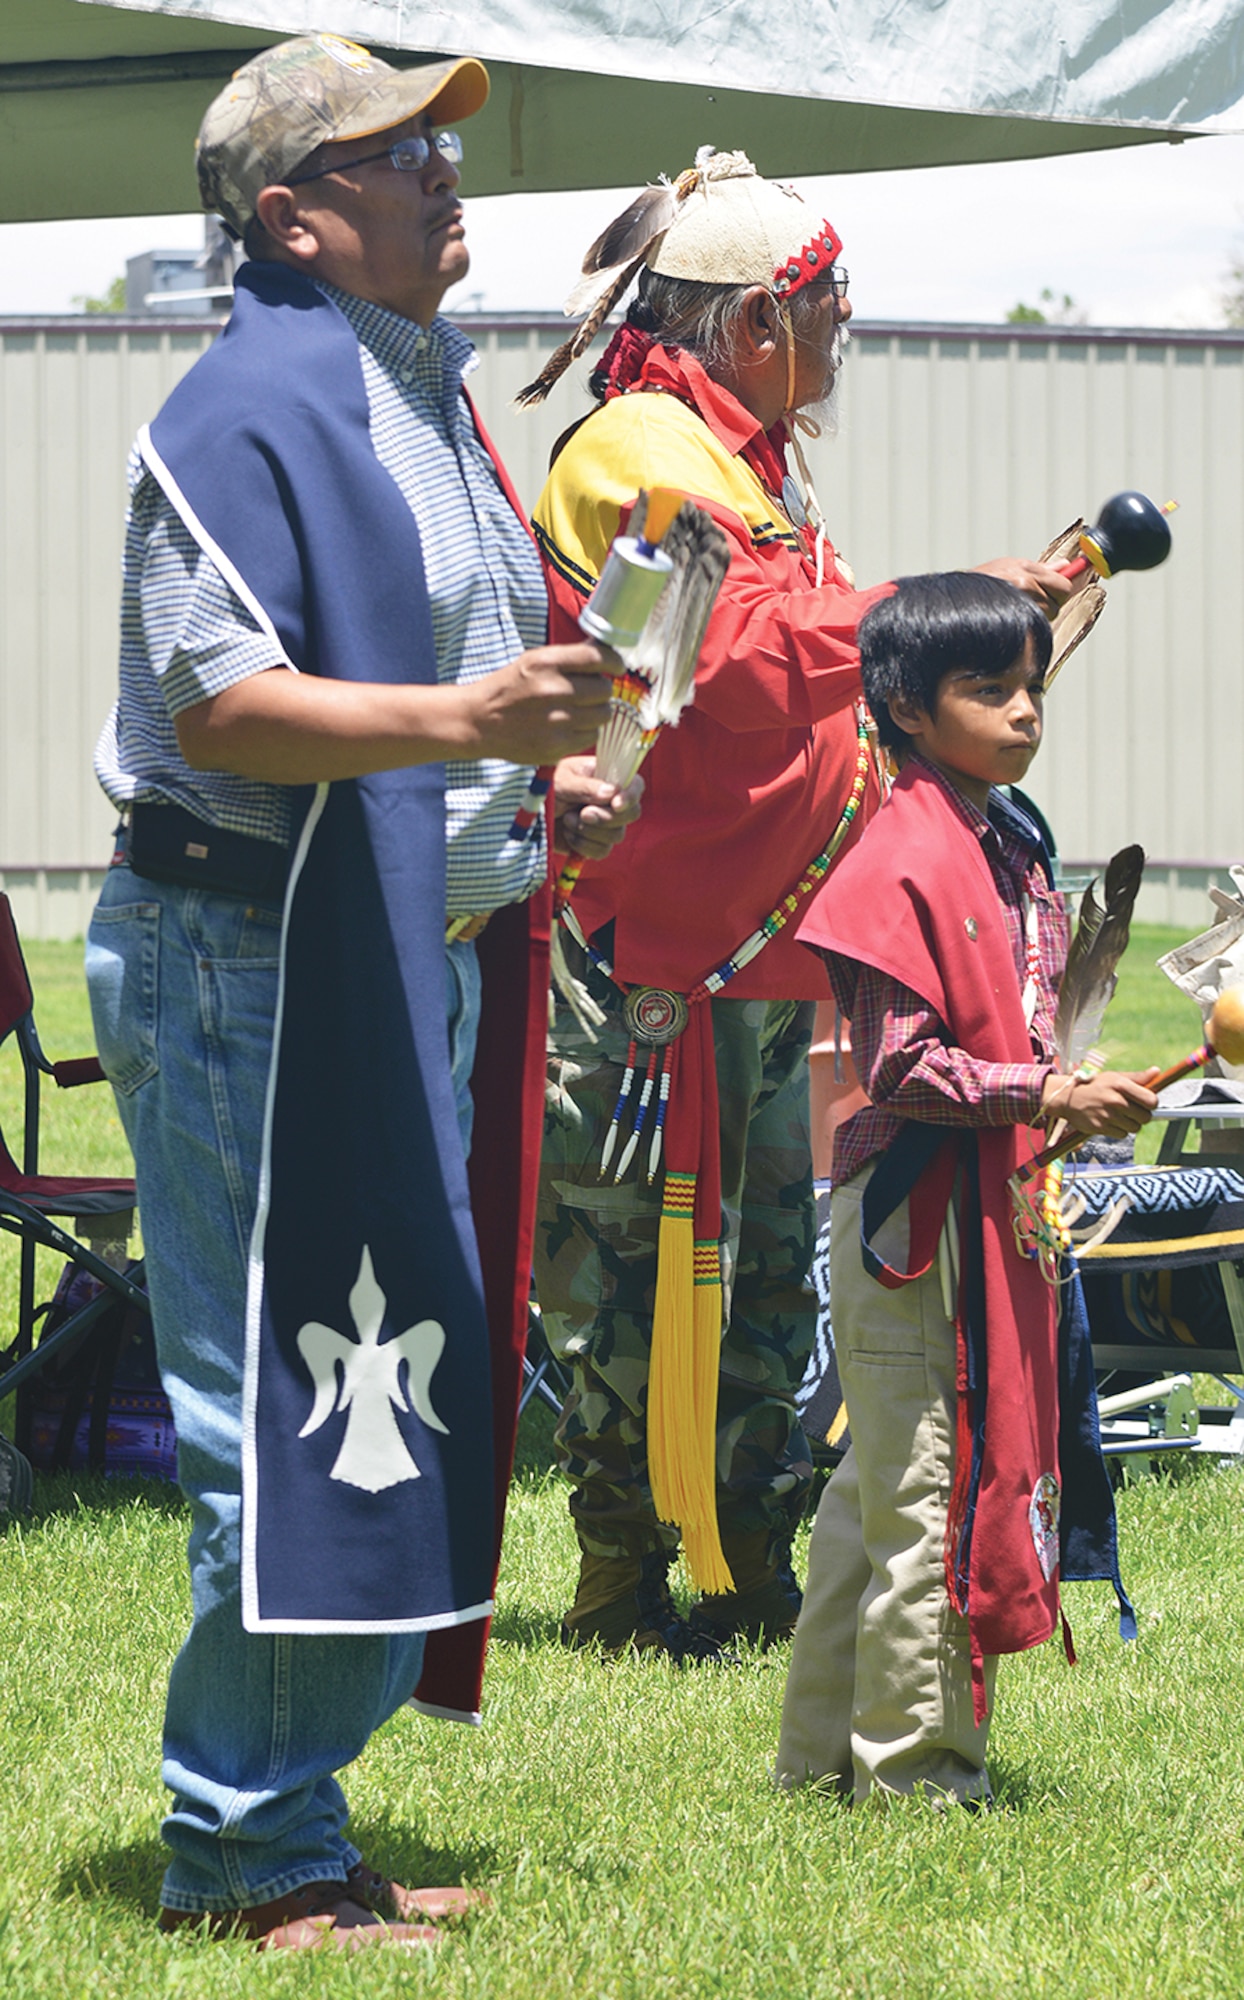 Jacob Begay, 10, from Window Rock, Arizona, and color guard William “Shorty” Lewis, far left, from Zuni Pueblo perform at the 10th Annual VA Veterans Gourd Dance July 18. The dance celebrates warriors’ victories and helps the healing process by providing fellowship and reminding veterans they are not alone, nor are they forgotten.  (Photo by Todd Berenger)